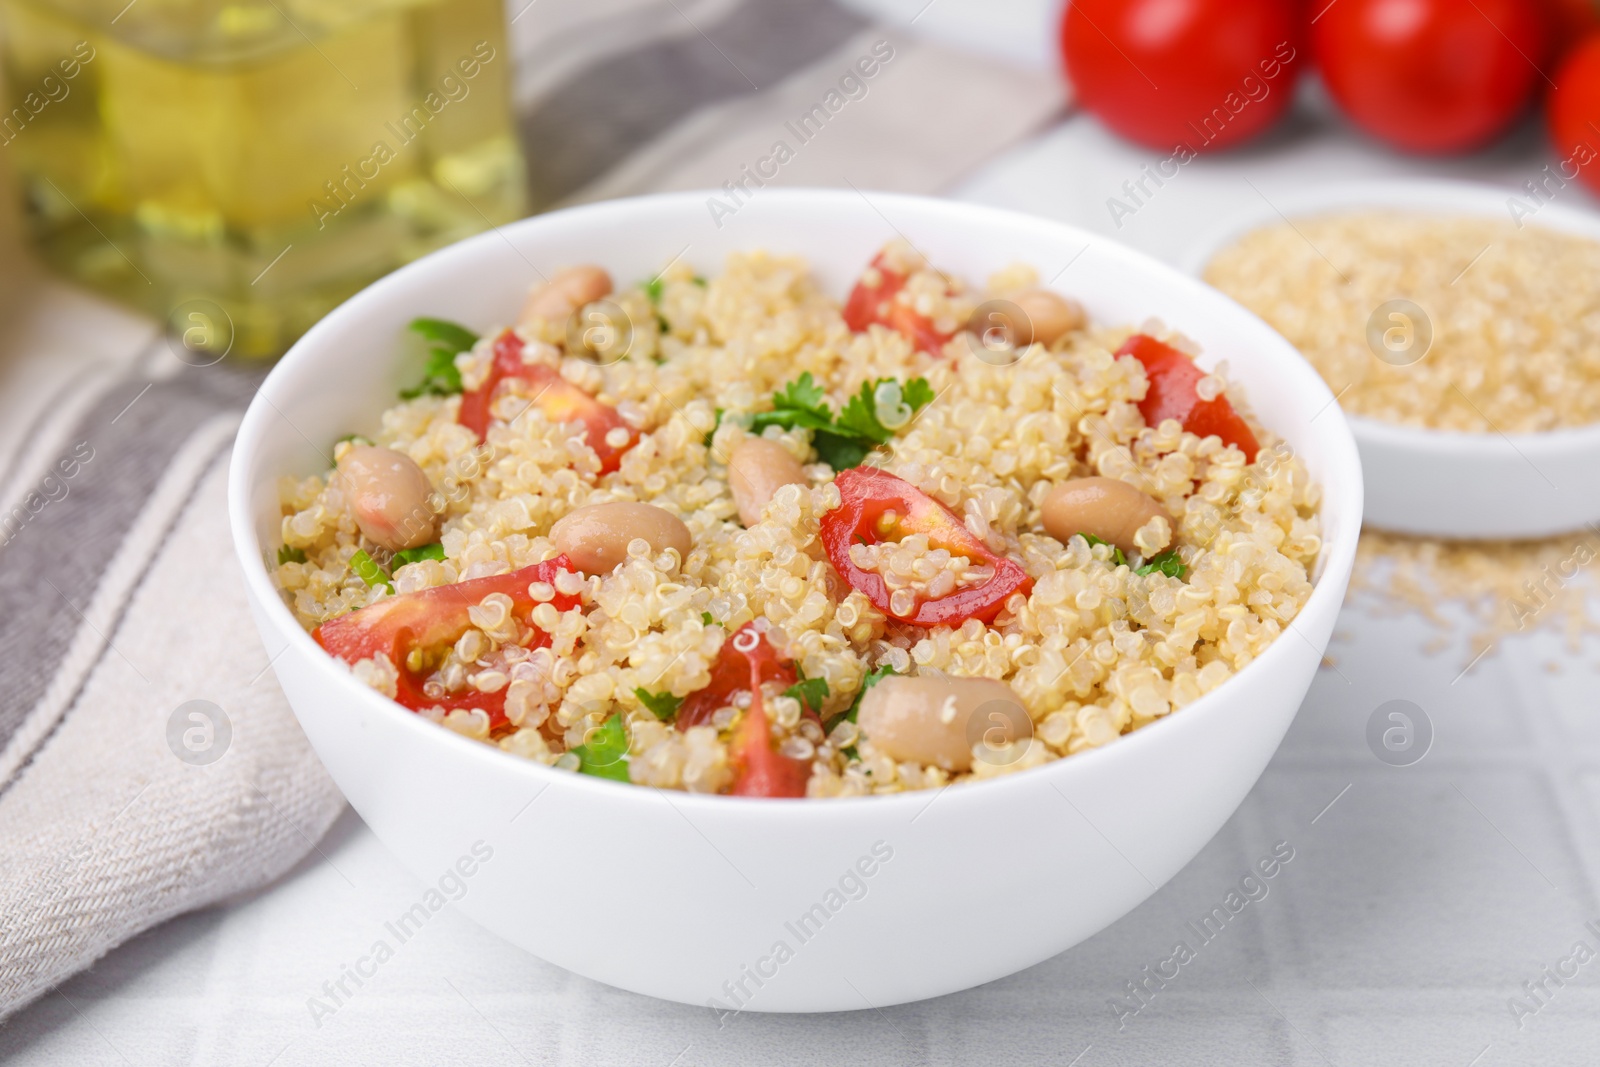 Photo of Delicious quinoa salad with tomatoes, beans and parsley served on white tiled table